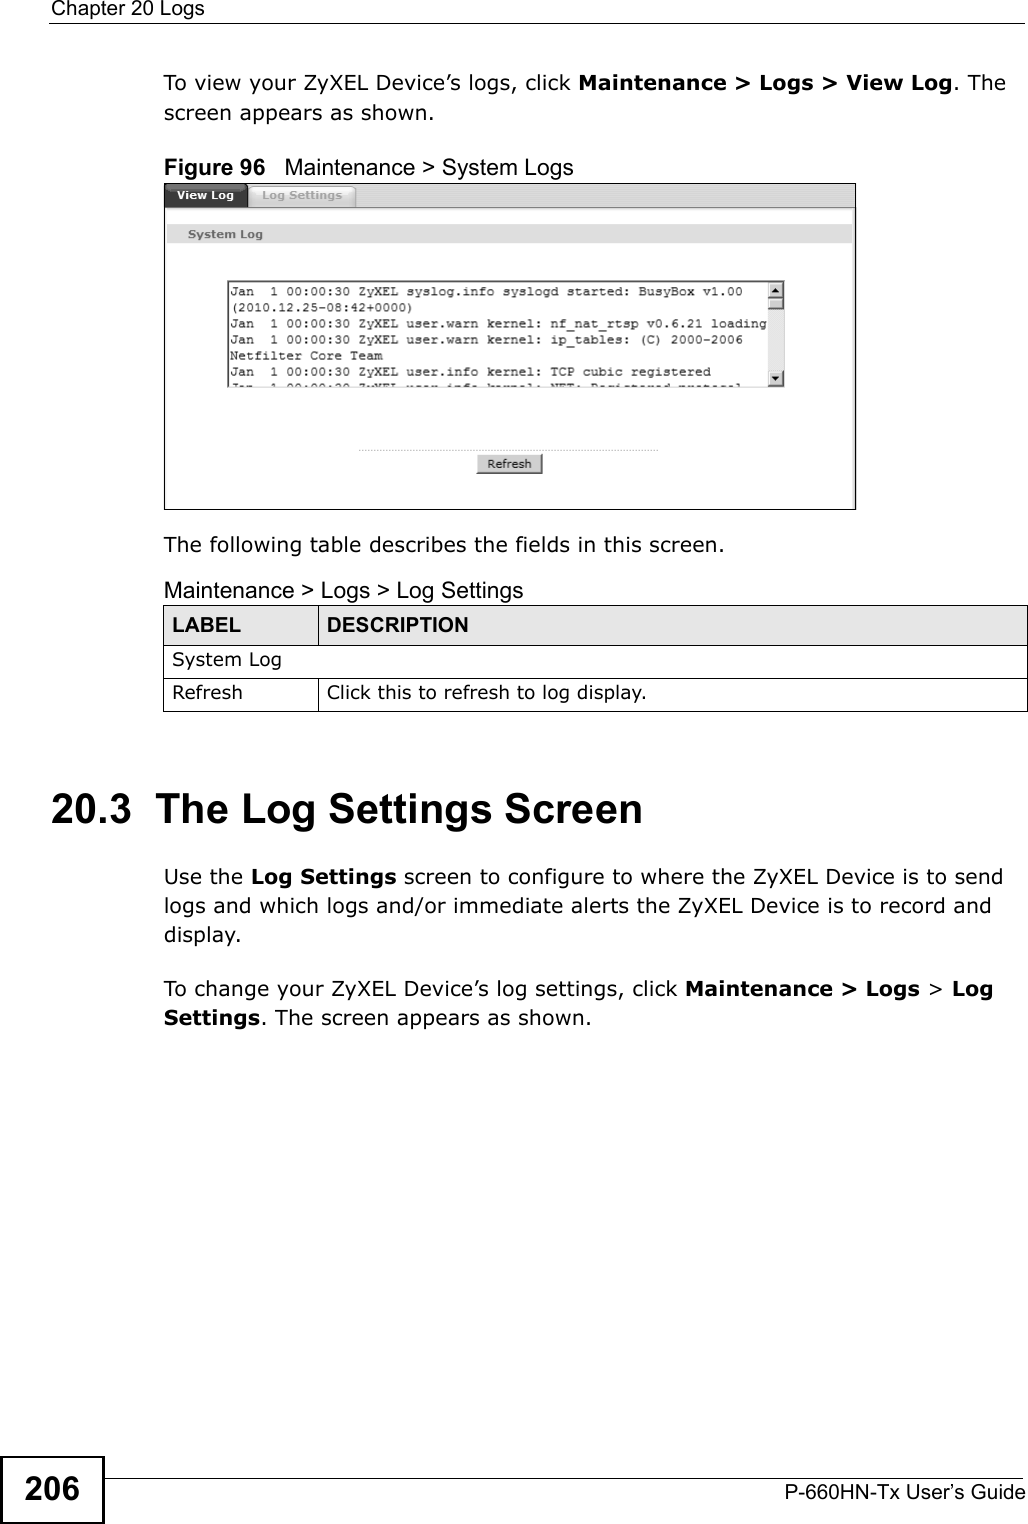 Chapter 20 LogsP-660HN-Tx User’s Guide206To view your ZyXEL Device’s logs, click Maintenance &gt; Logs &gt; View Log. The screen appears as shown.Figure 96   Maintenance &gt; System LogsThe following table describes the fields in this screen. 20.3  The Log Settings ScreenUse the Log Settings screen to configure to where the ZyXEL Device is to send logs and which logs and/or immediate alerts the ZyXEL Device is to record and display.To change your ZyXEL Device’s log settings, click Maintenance &gt; Logs &gt; Log Settings. The screen appears as shown.Maintenance &gt; Logs &gt; Log SettingsLABEL DESCRIPTIONSystem LogRefresh Click this to refresh to log display.